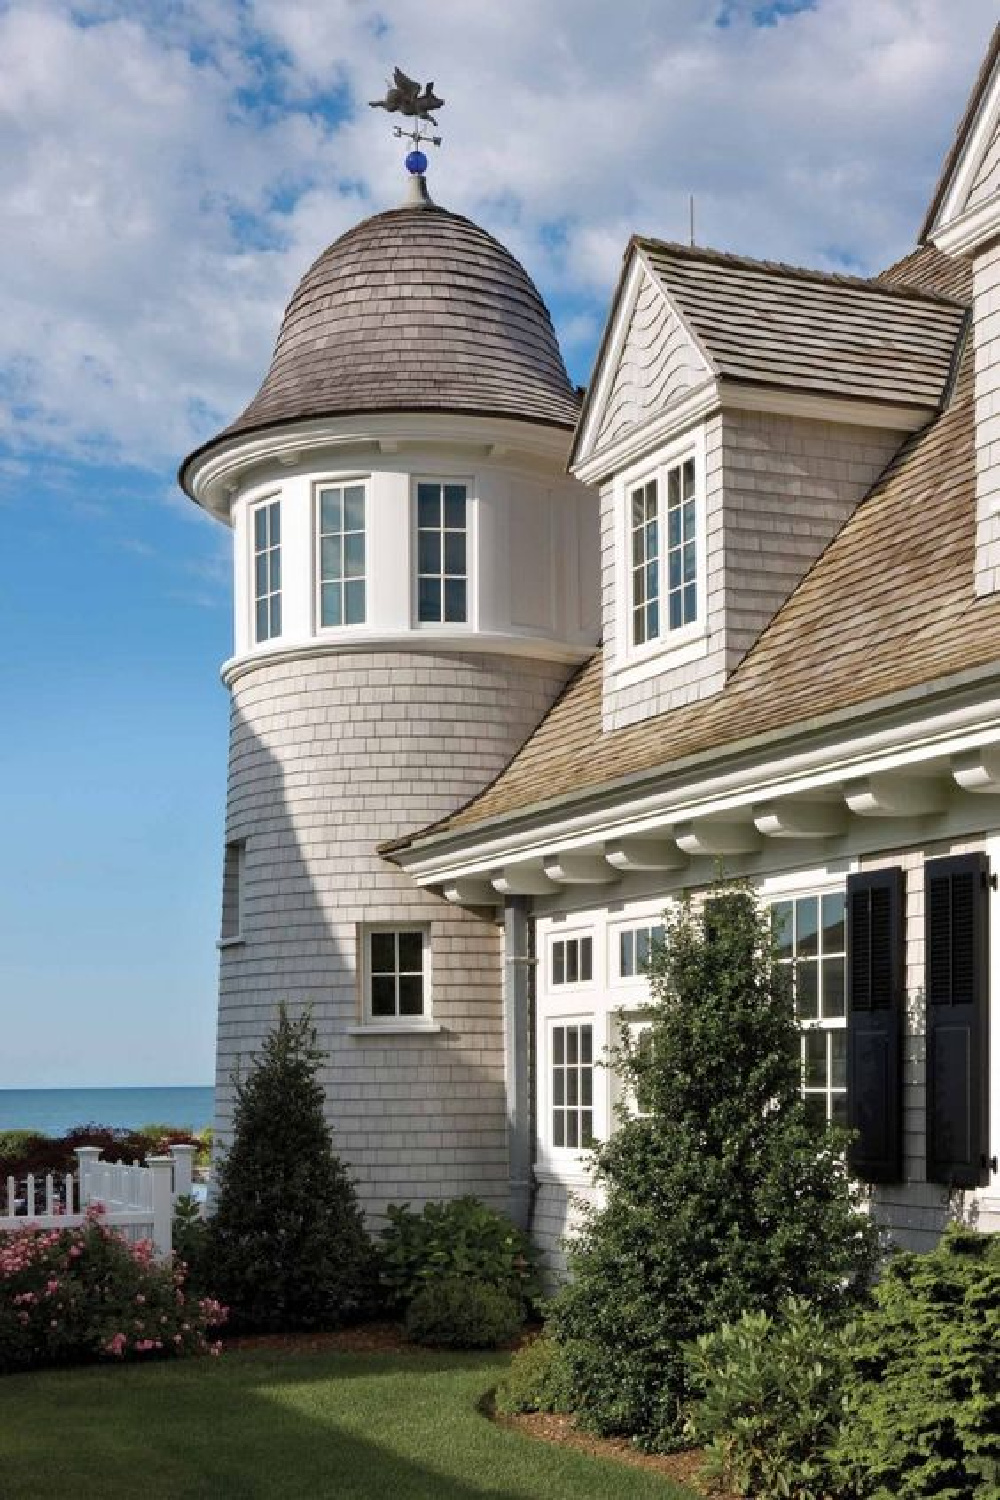 Beach house and coastal architecture style. COME TOUR MORE Nantucket Style Chic & Summer Vibes! #nantucket #interiordesign #designinspiration #summerliving #coastalstyle